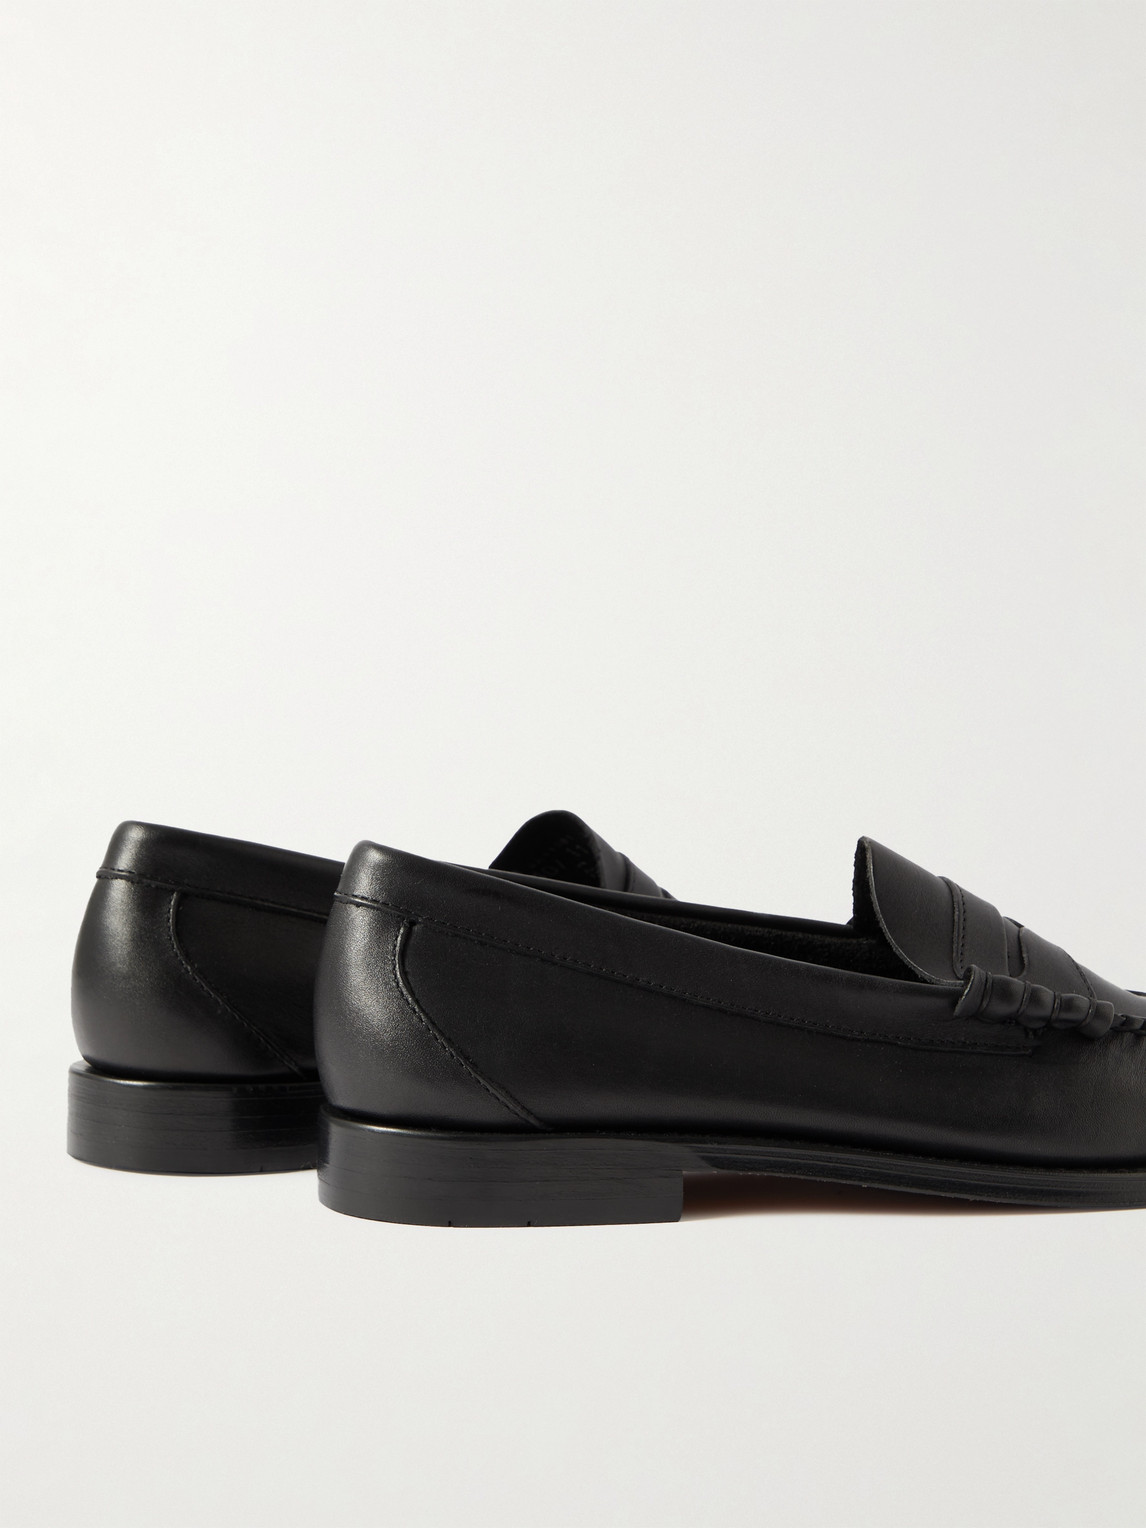 Shop G.h. Bass & Co. Weejuns Heritage Larson Leather Penny Loafers In Black